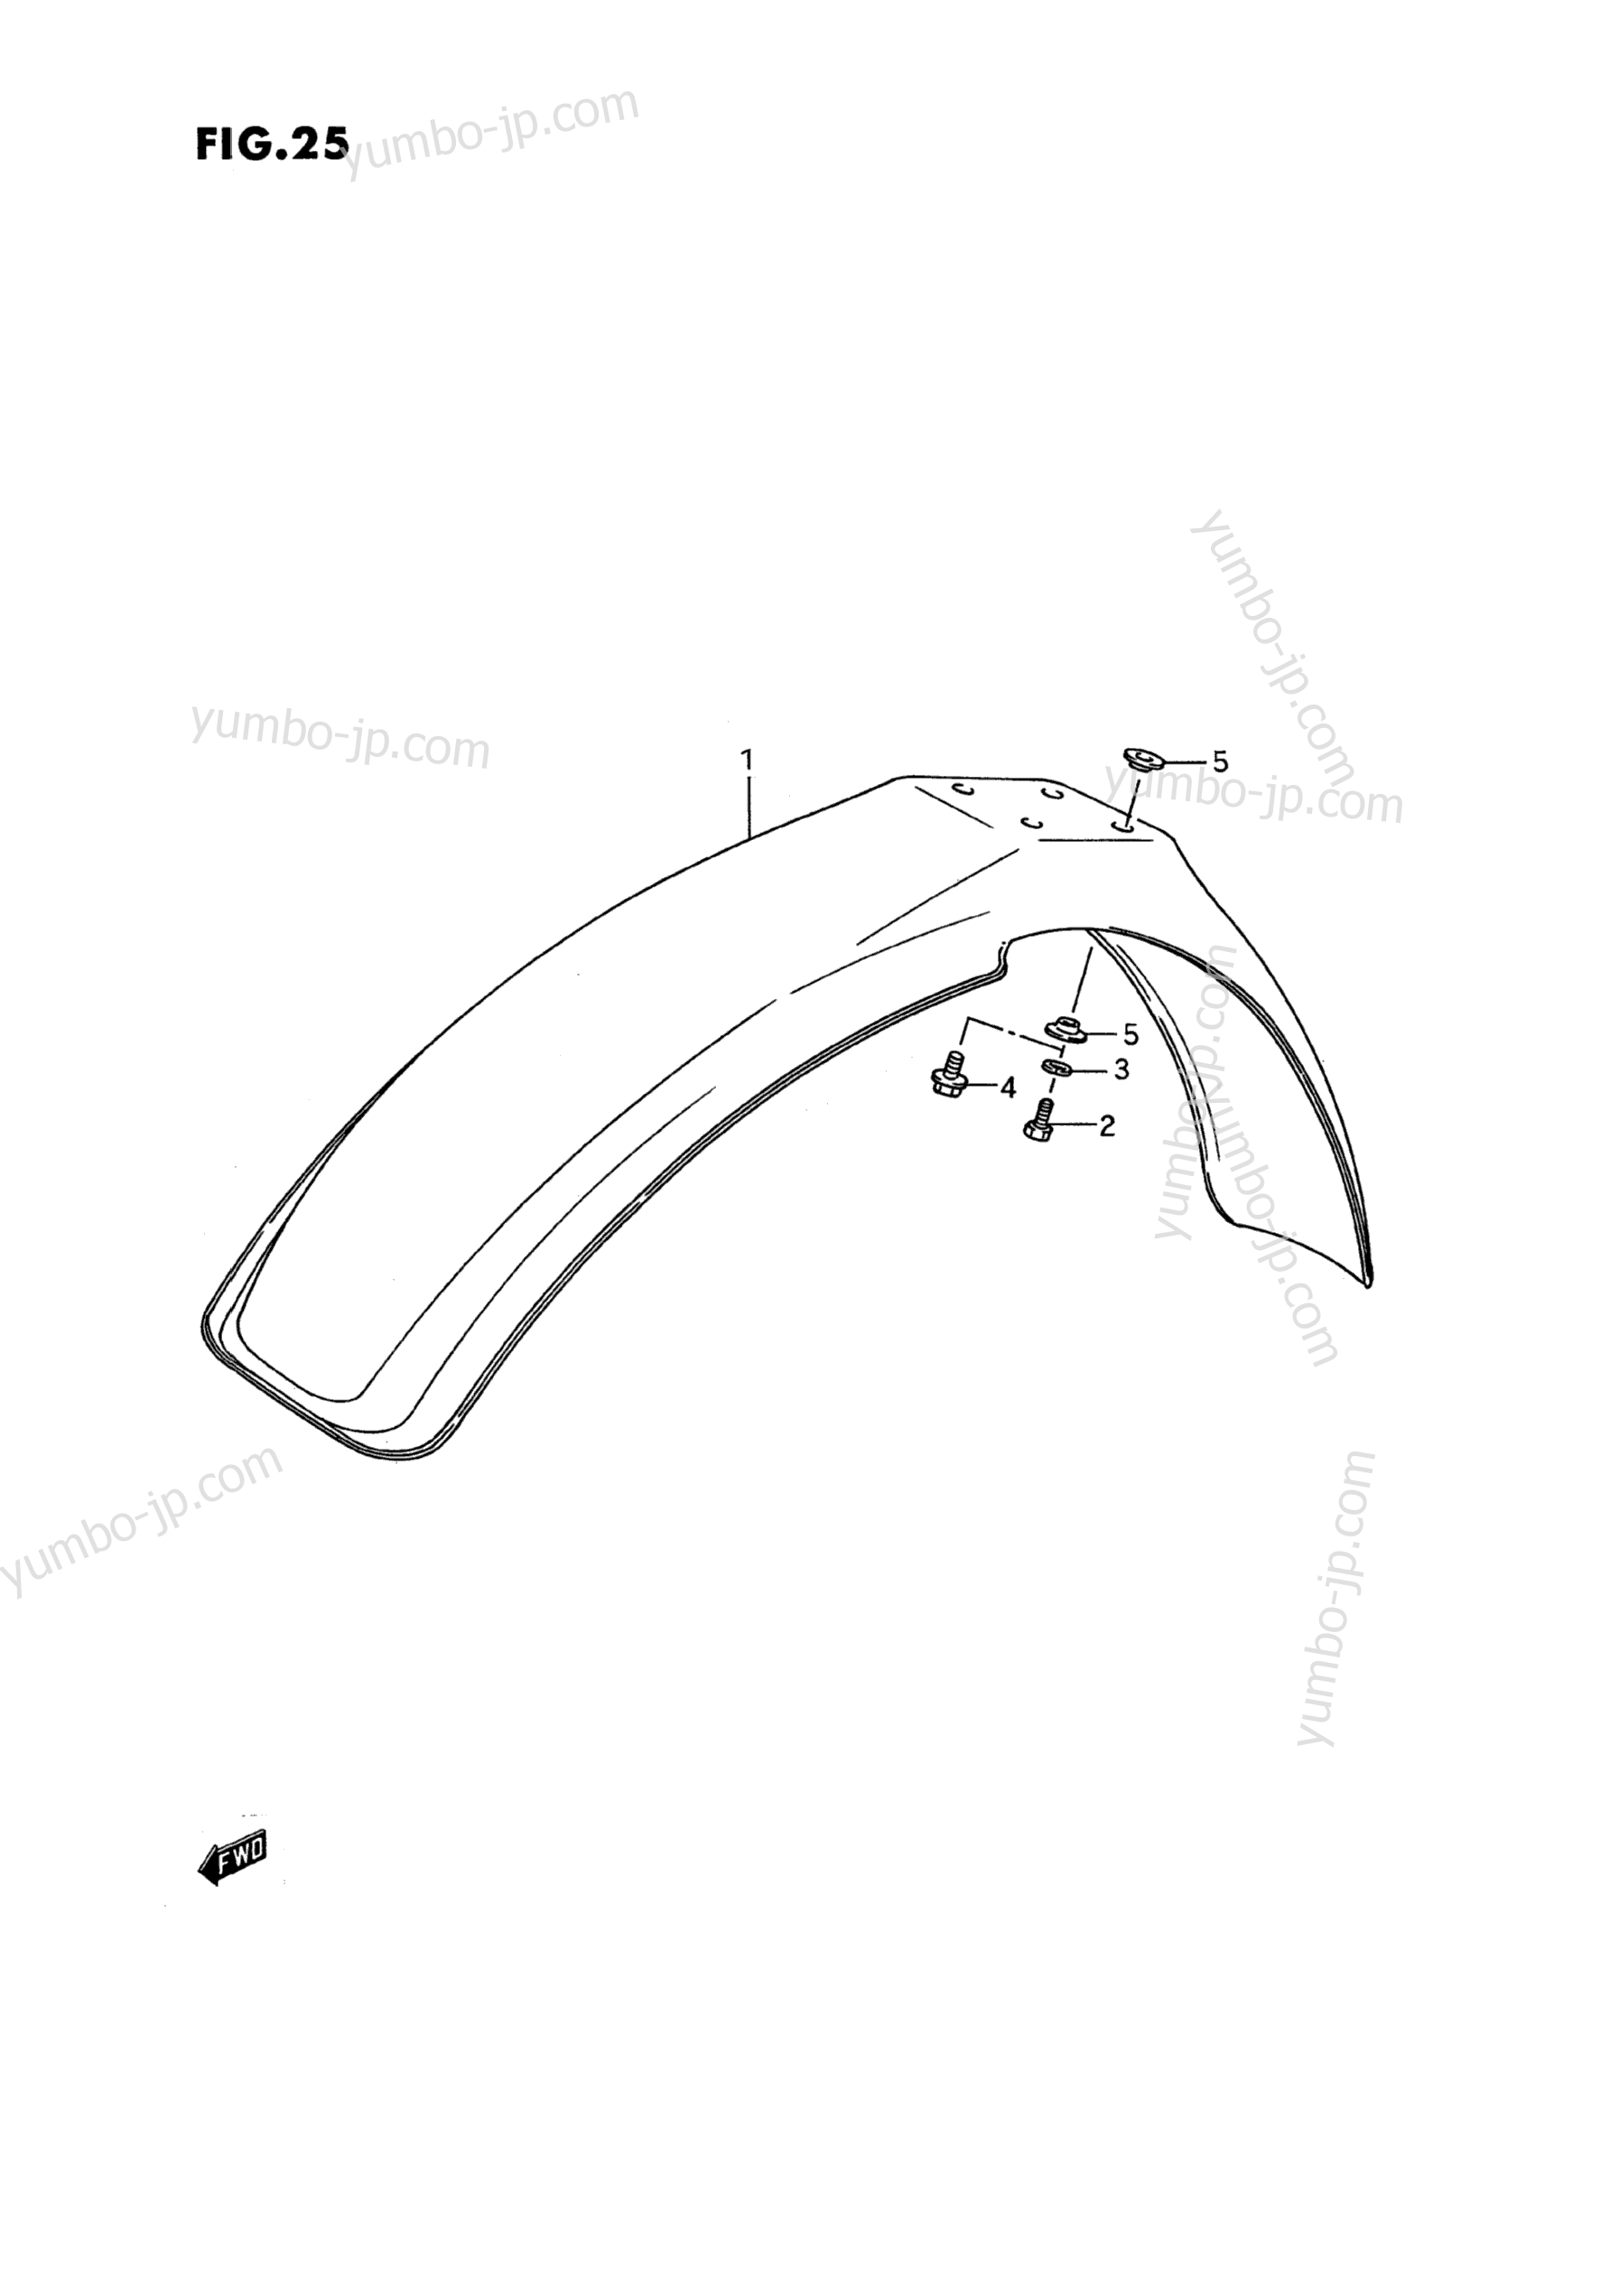 FRONT FENDER for motorcycles SUZUKI RM80 1992 year